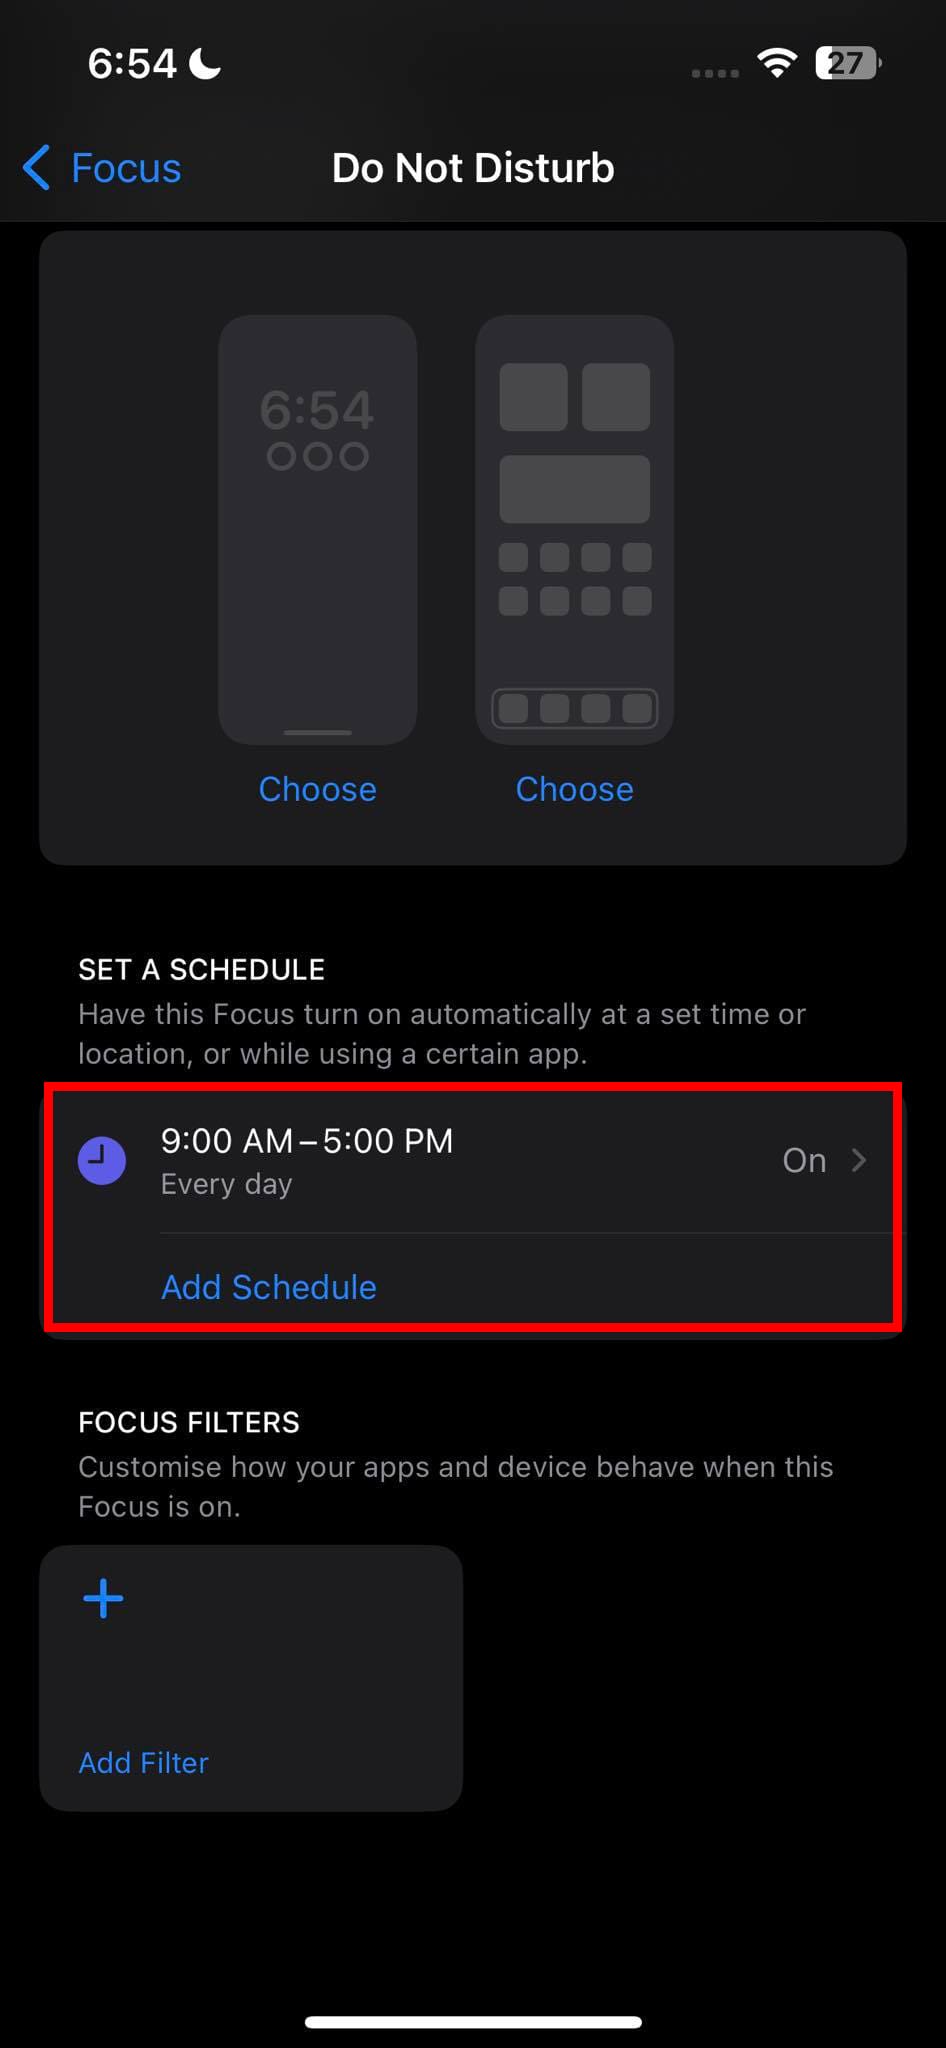 Scheduled DND is active on iPhone 14